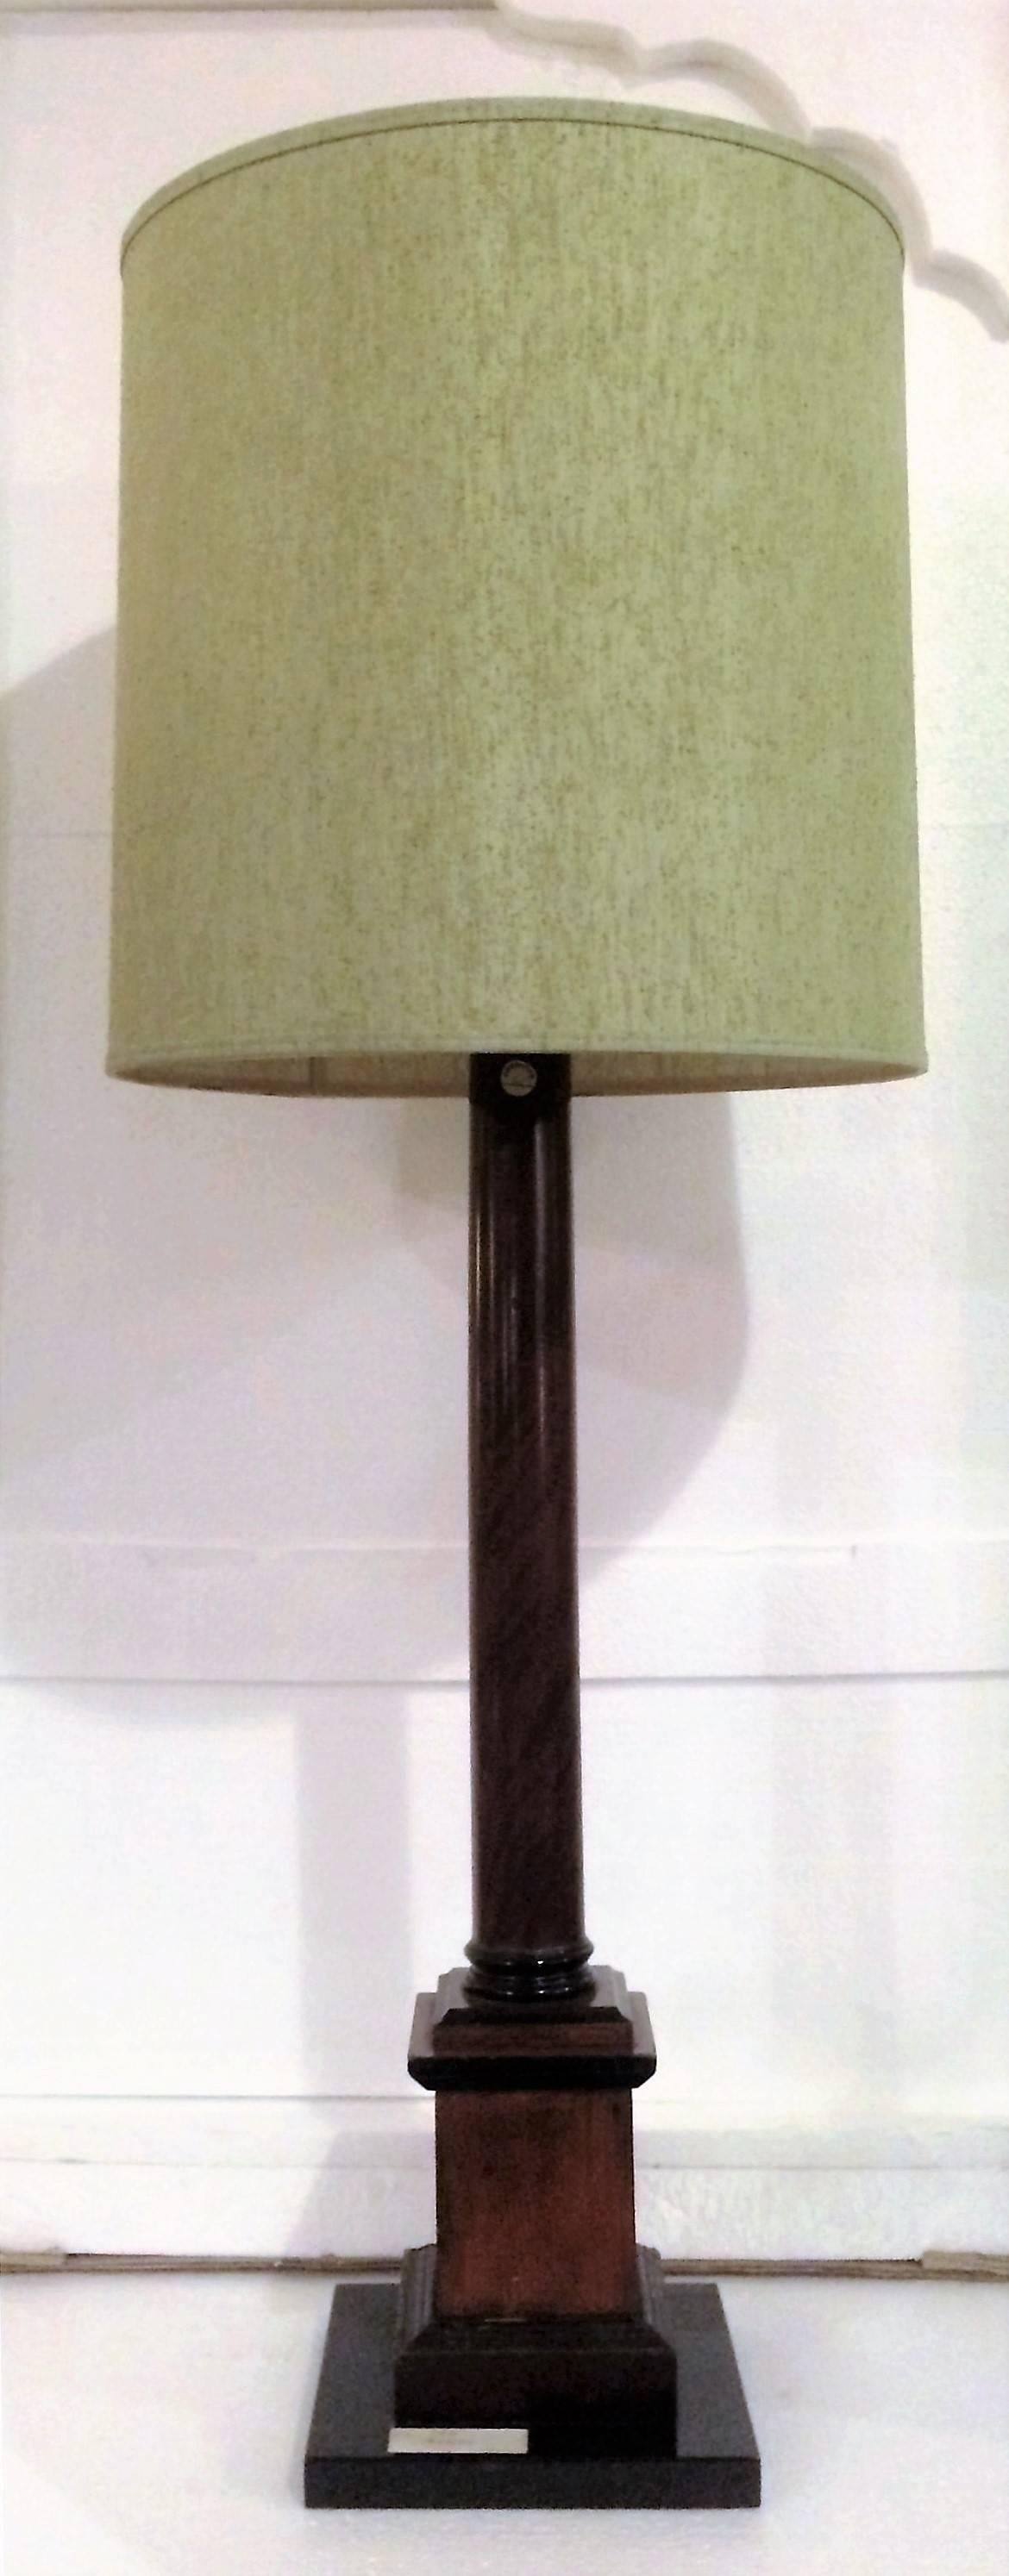 This Provenance Christie’s NY 19th century stick form style lamp is made of mahogany, with ebony accents, mounted on a stepped base. The lamp base itself is 34 inches in height, with the shade it is 44 inches in height.

